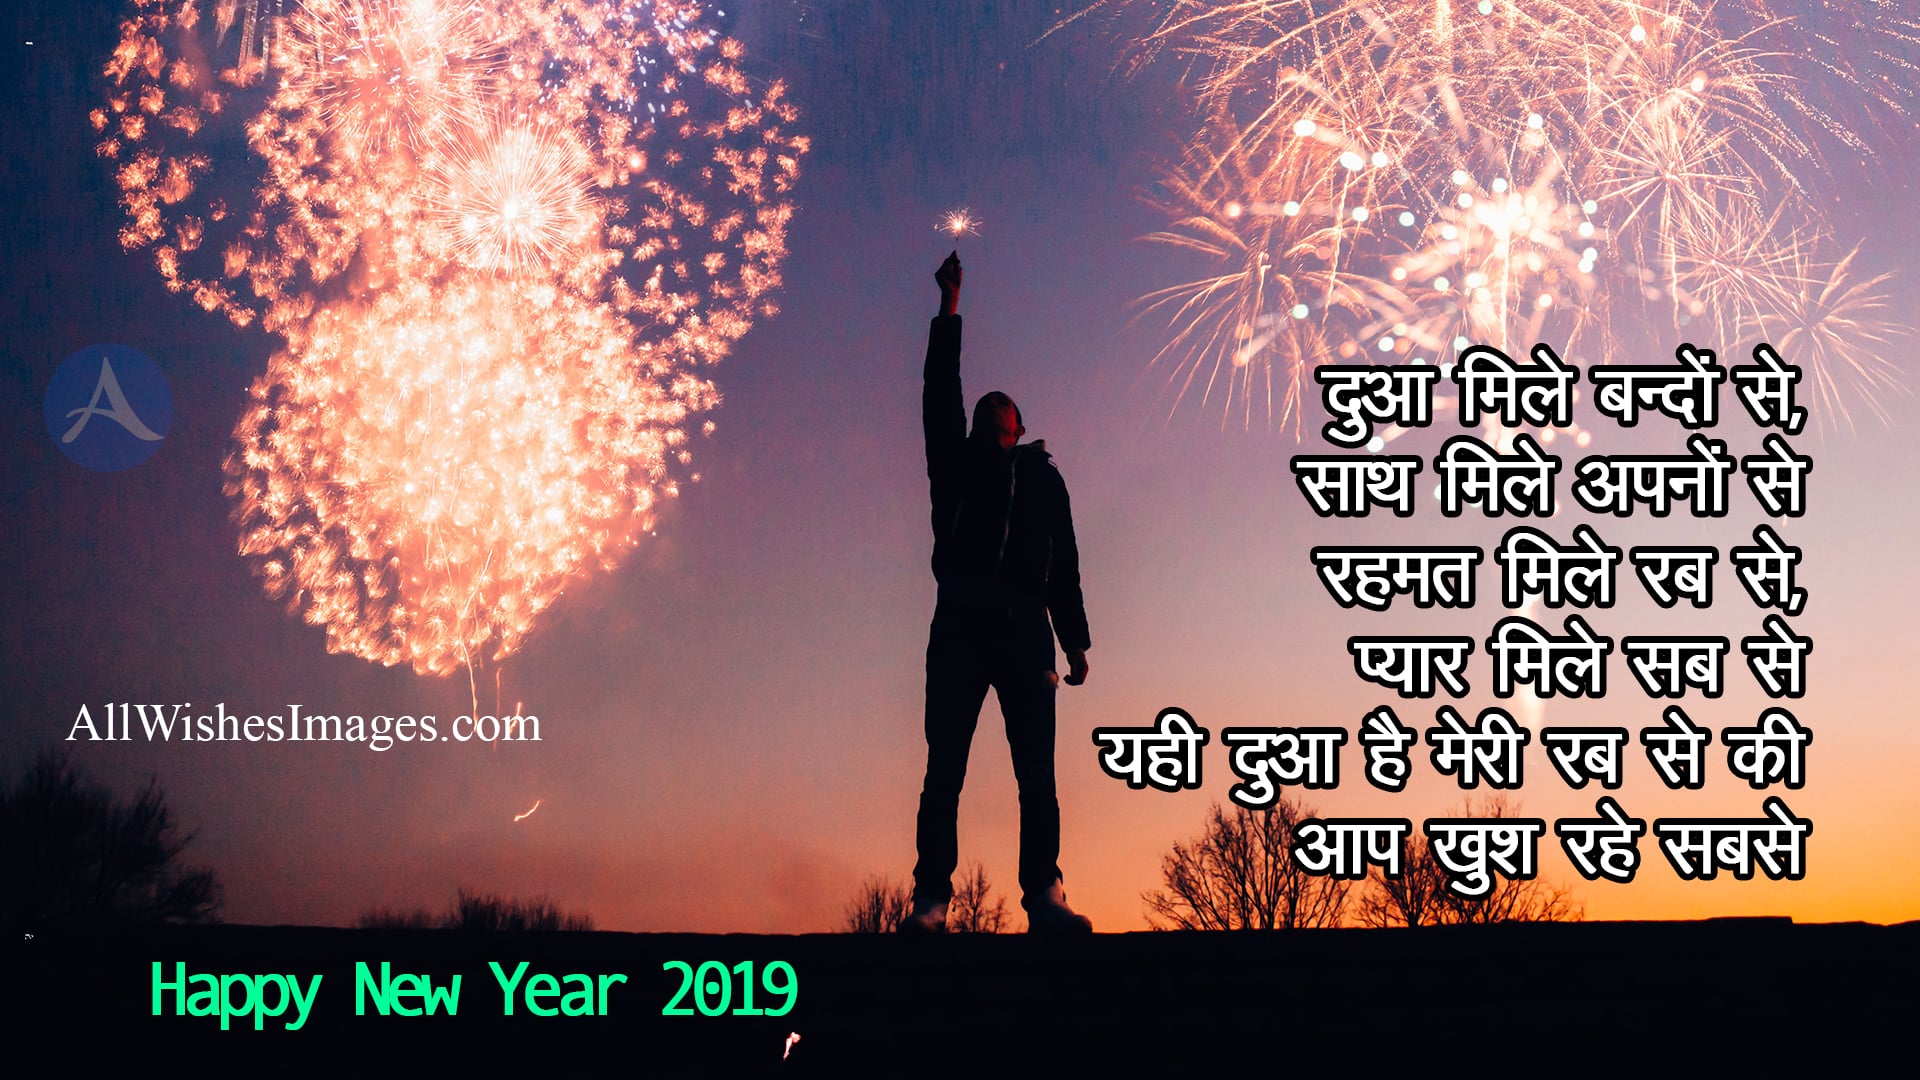 New Year Shayari Images Download - All Wishes Images - Images for WhatsApp